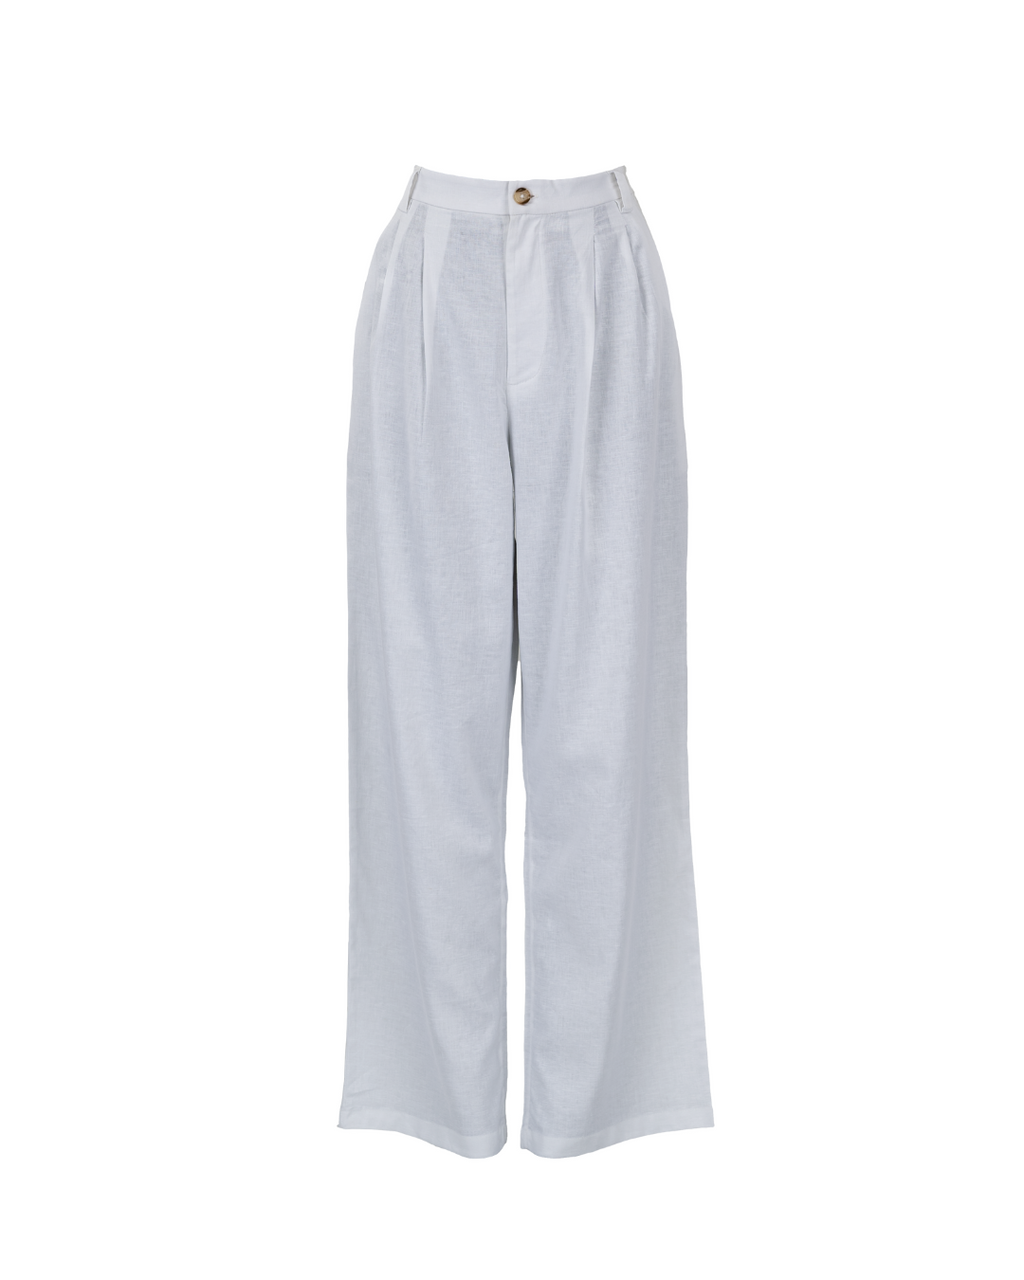 High-rise pleated pants in white - CO